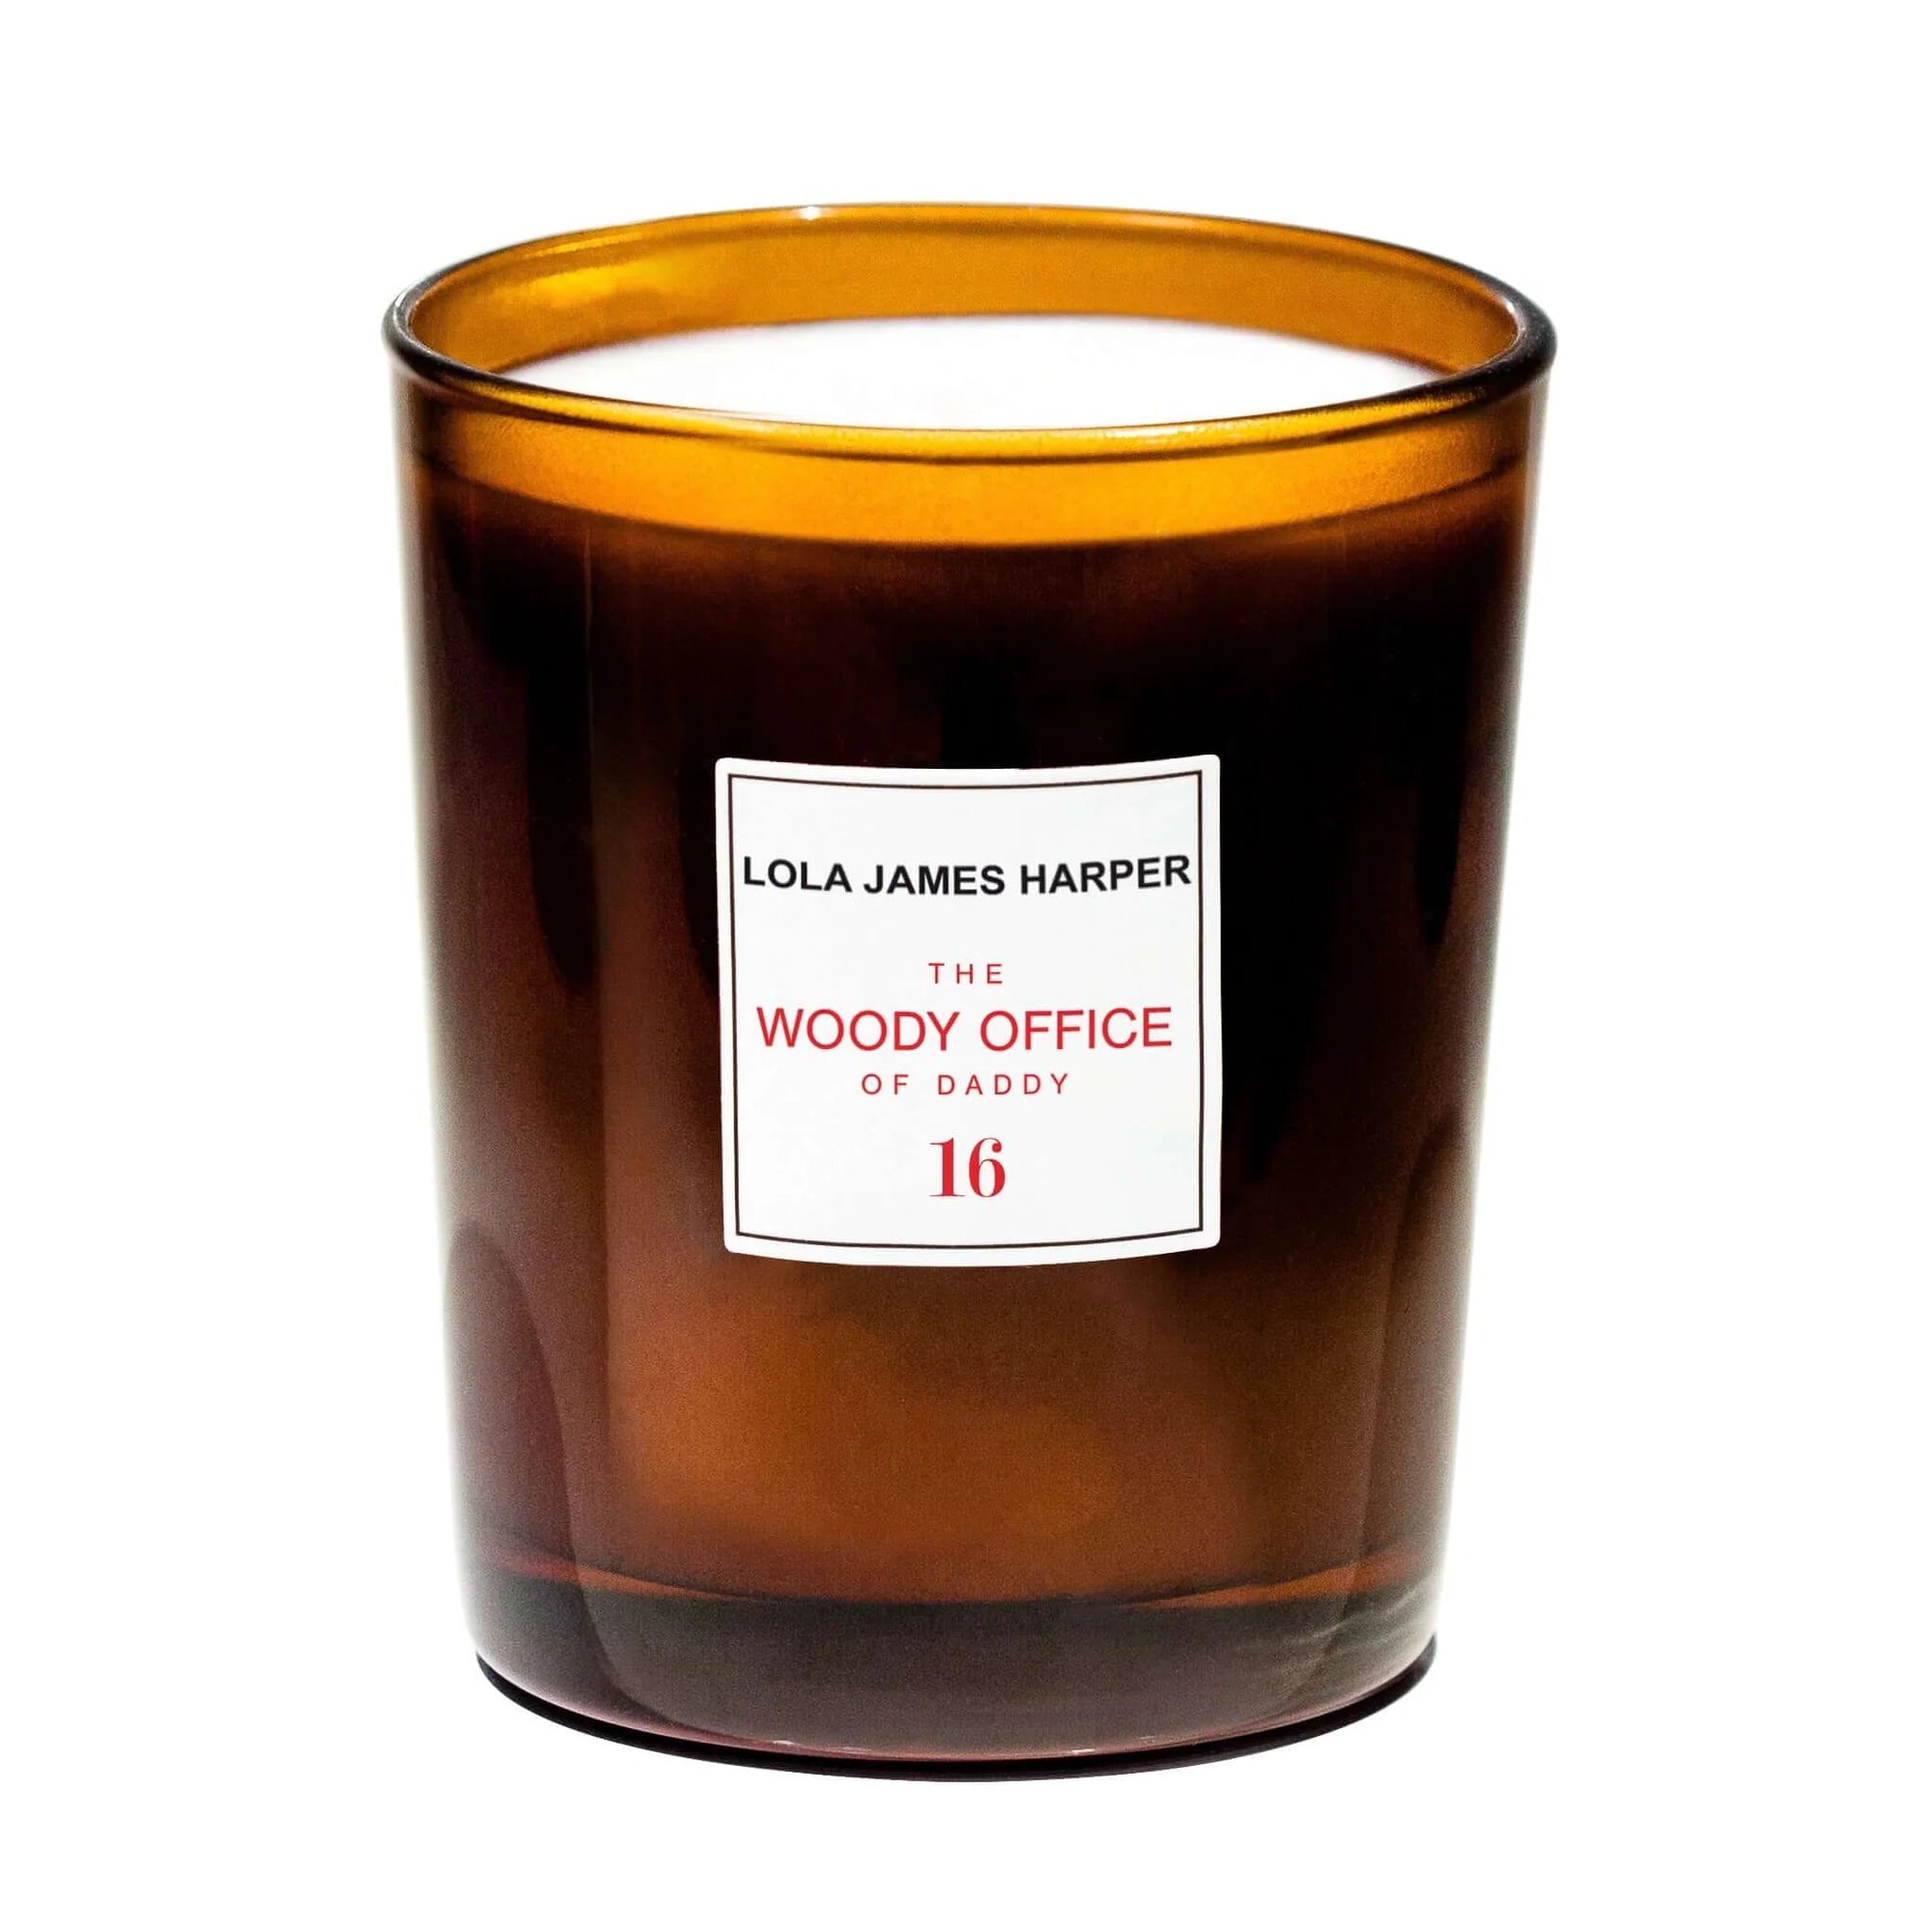 Lola James Harper 16 The Woody Office of Daddy - Candle 190G